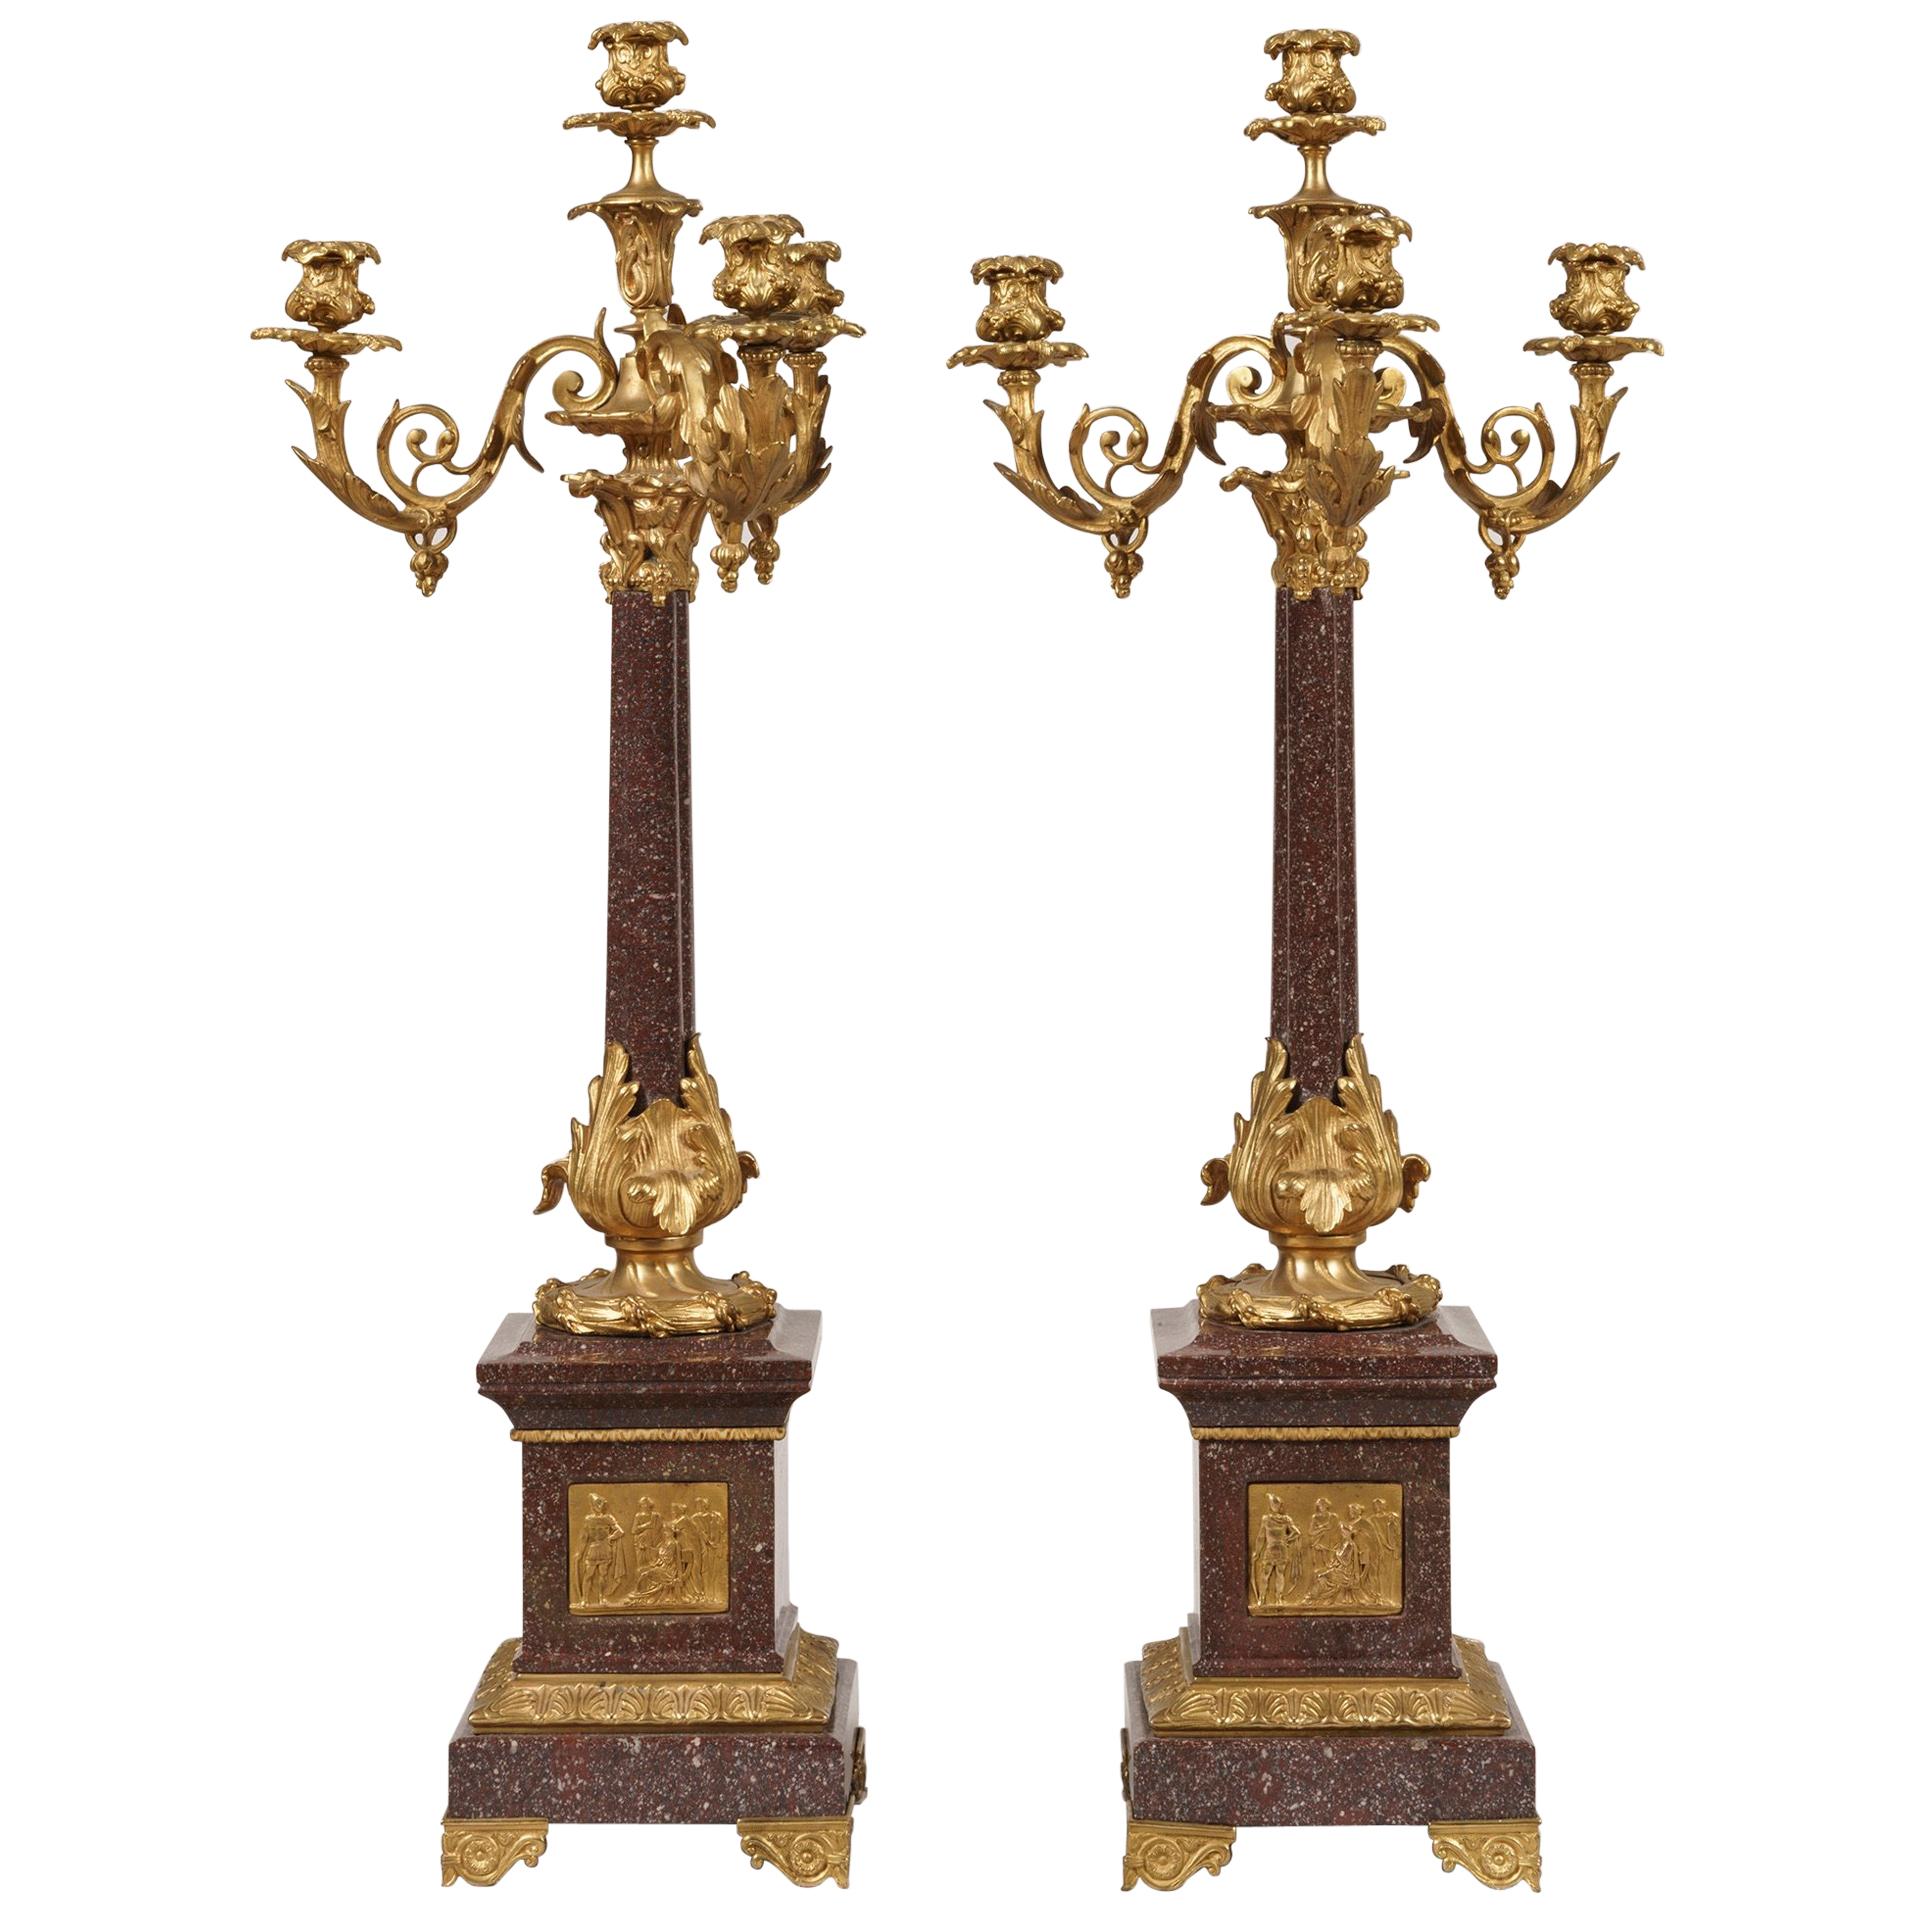 Pair of French 19th Century Porphyry and Ormolu Candelabra in Louis XVI Manner